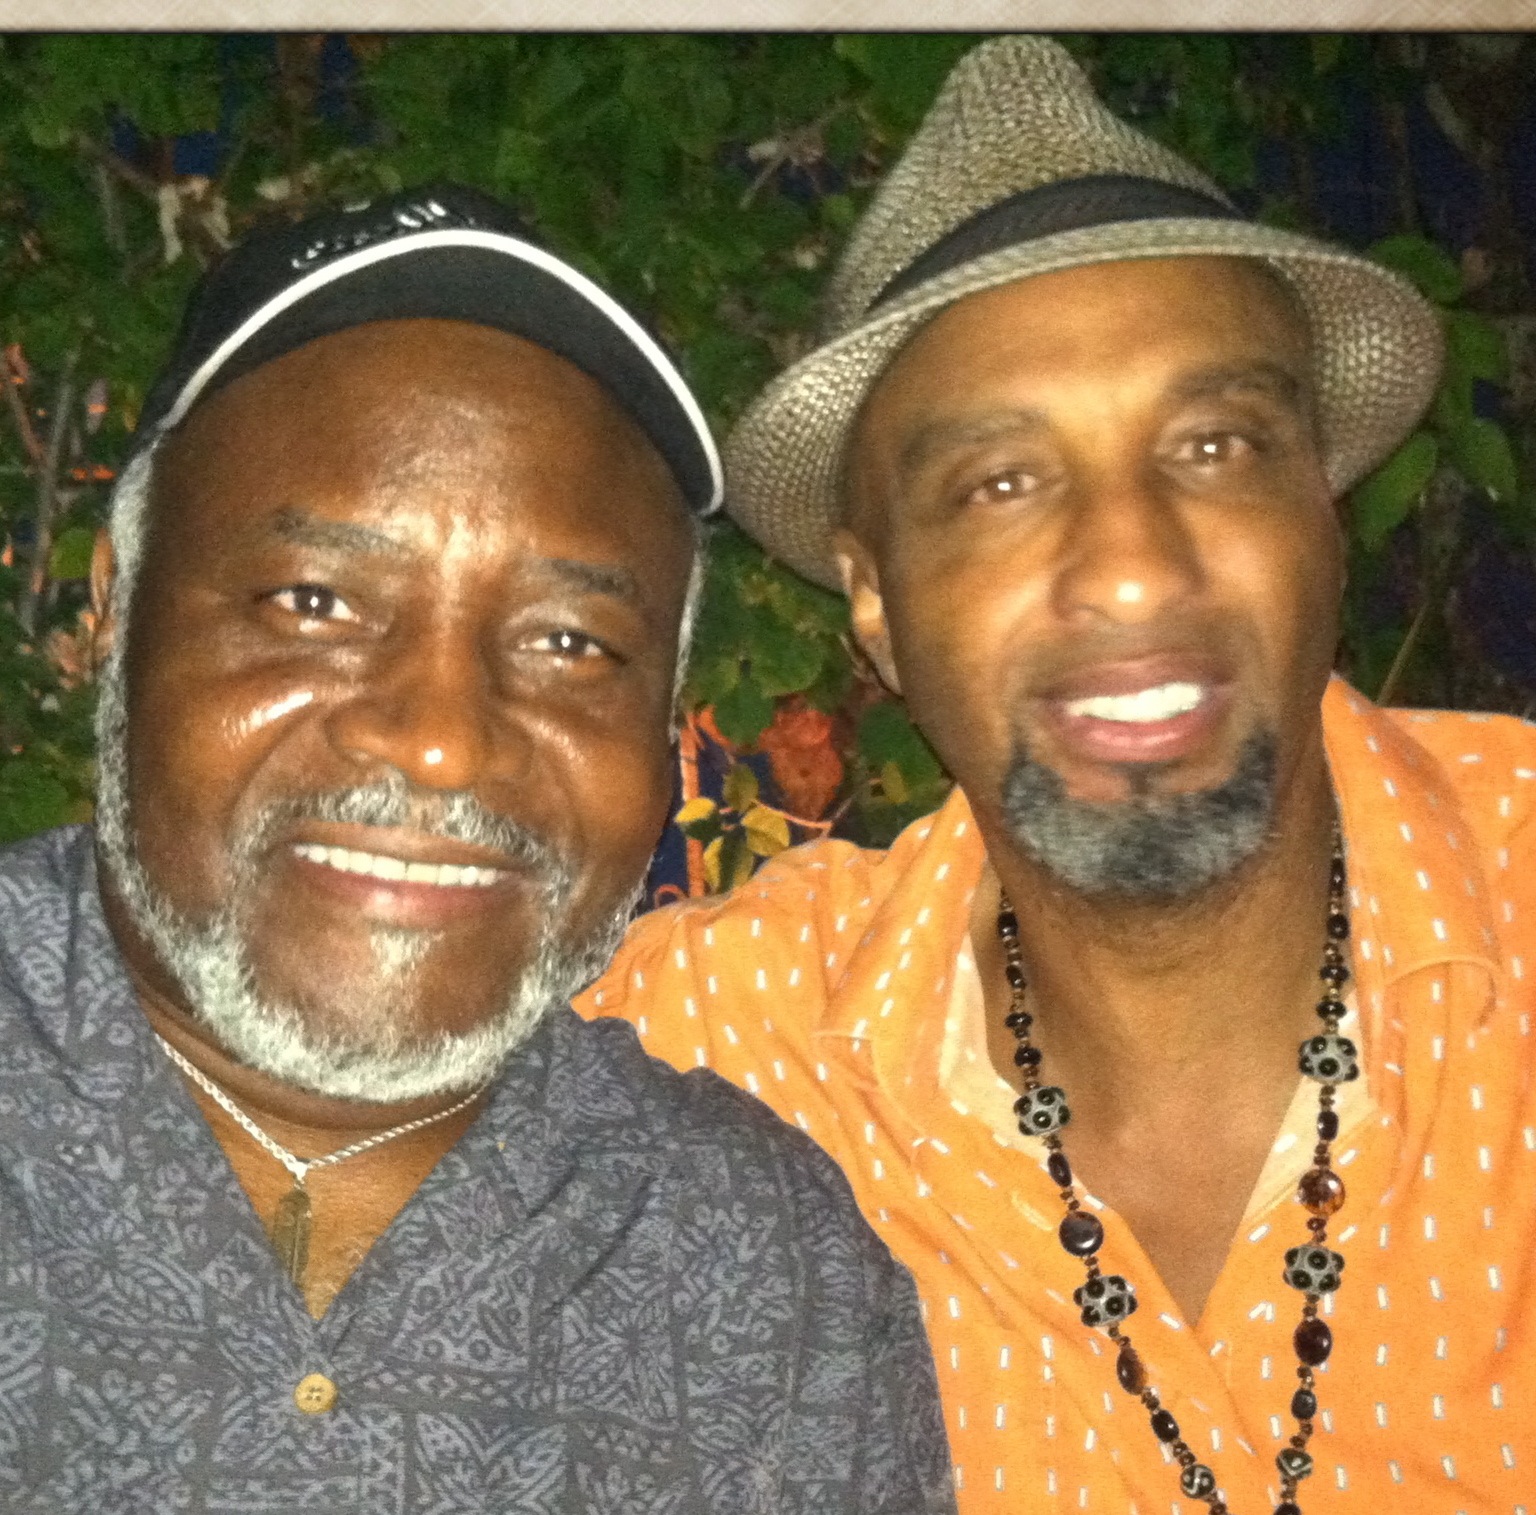 #American Actors #B.T. Taylor and #Ellis Williams enjoying after party at the pool'